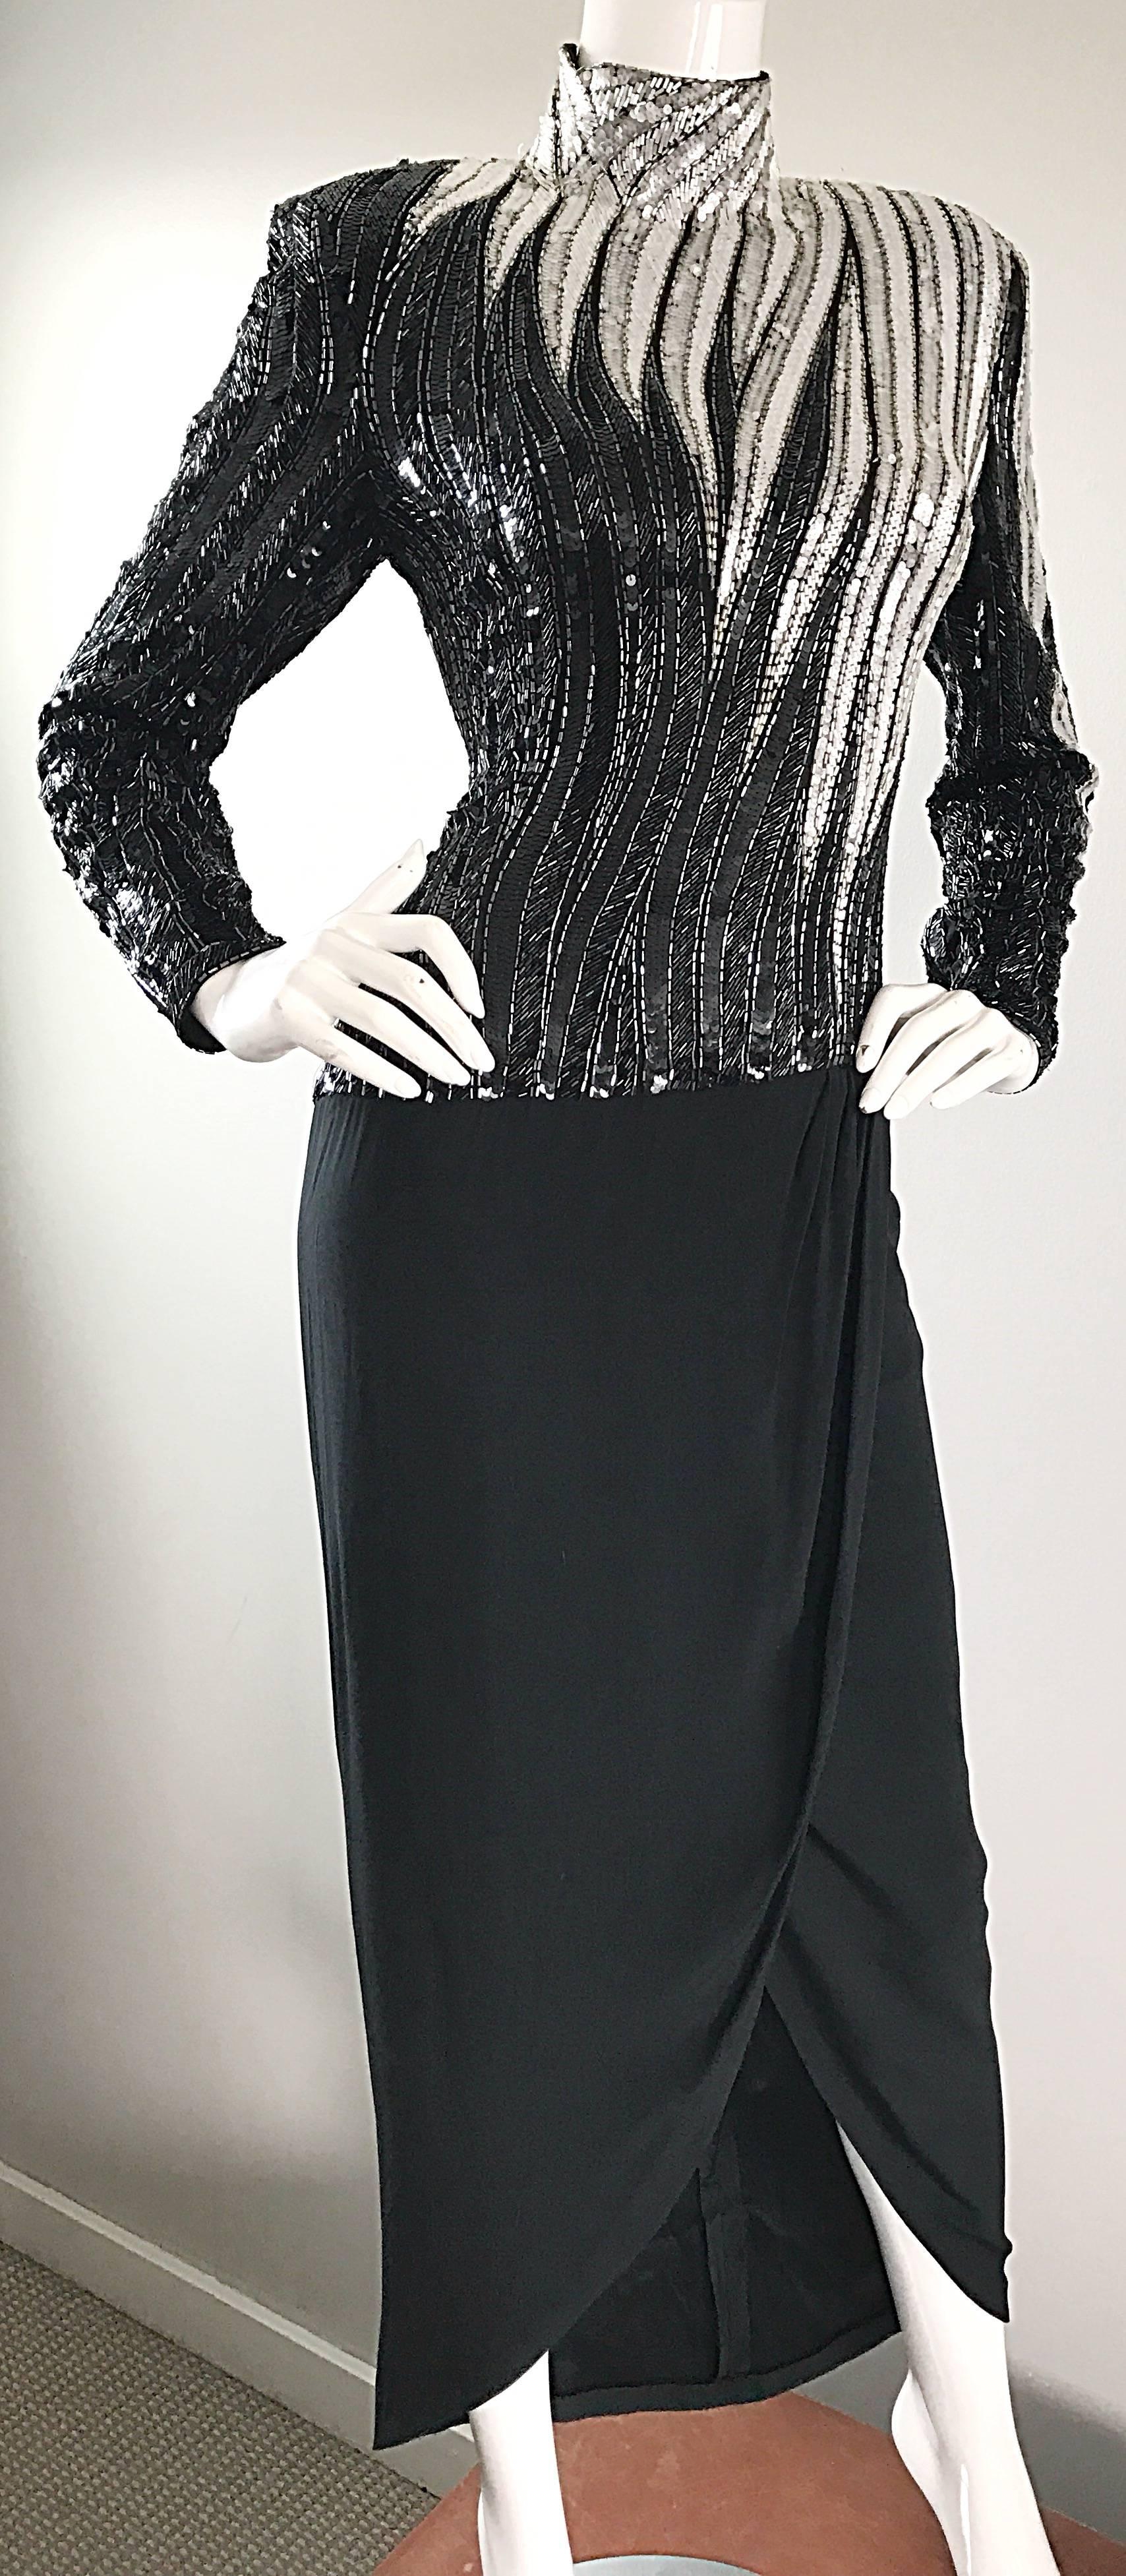 Sensational Vintage Bob Mackie Black and Silver 80s Heavily Beaded Dramatic Gown In Excellent Condition For Sale In San Diego, CA